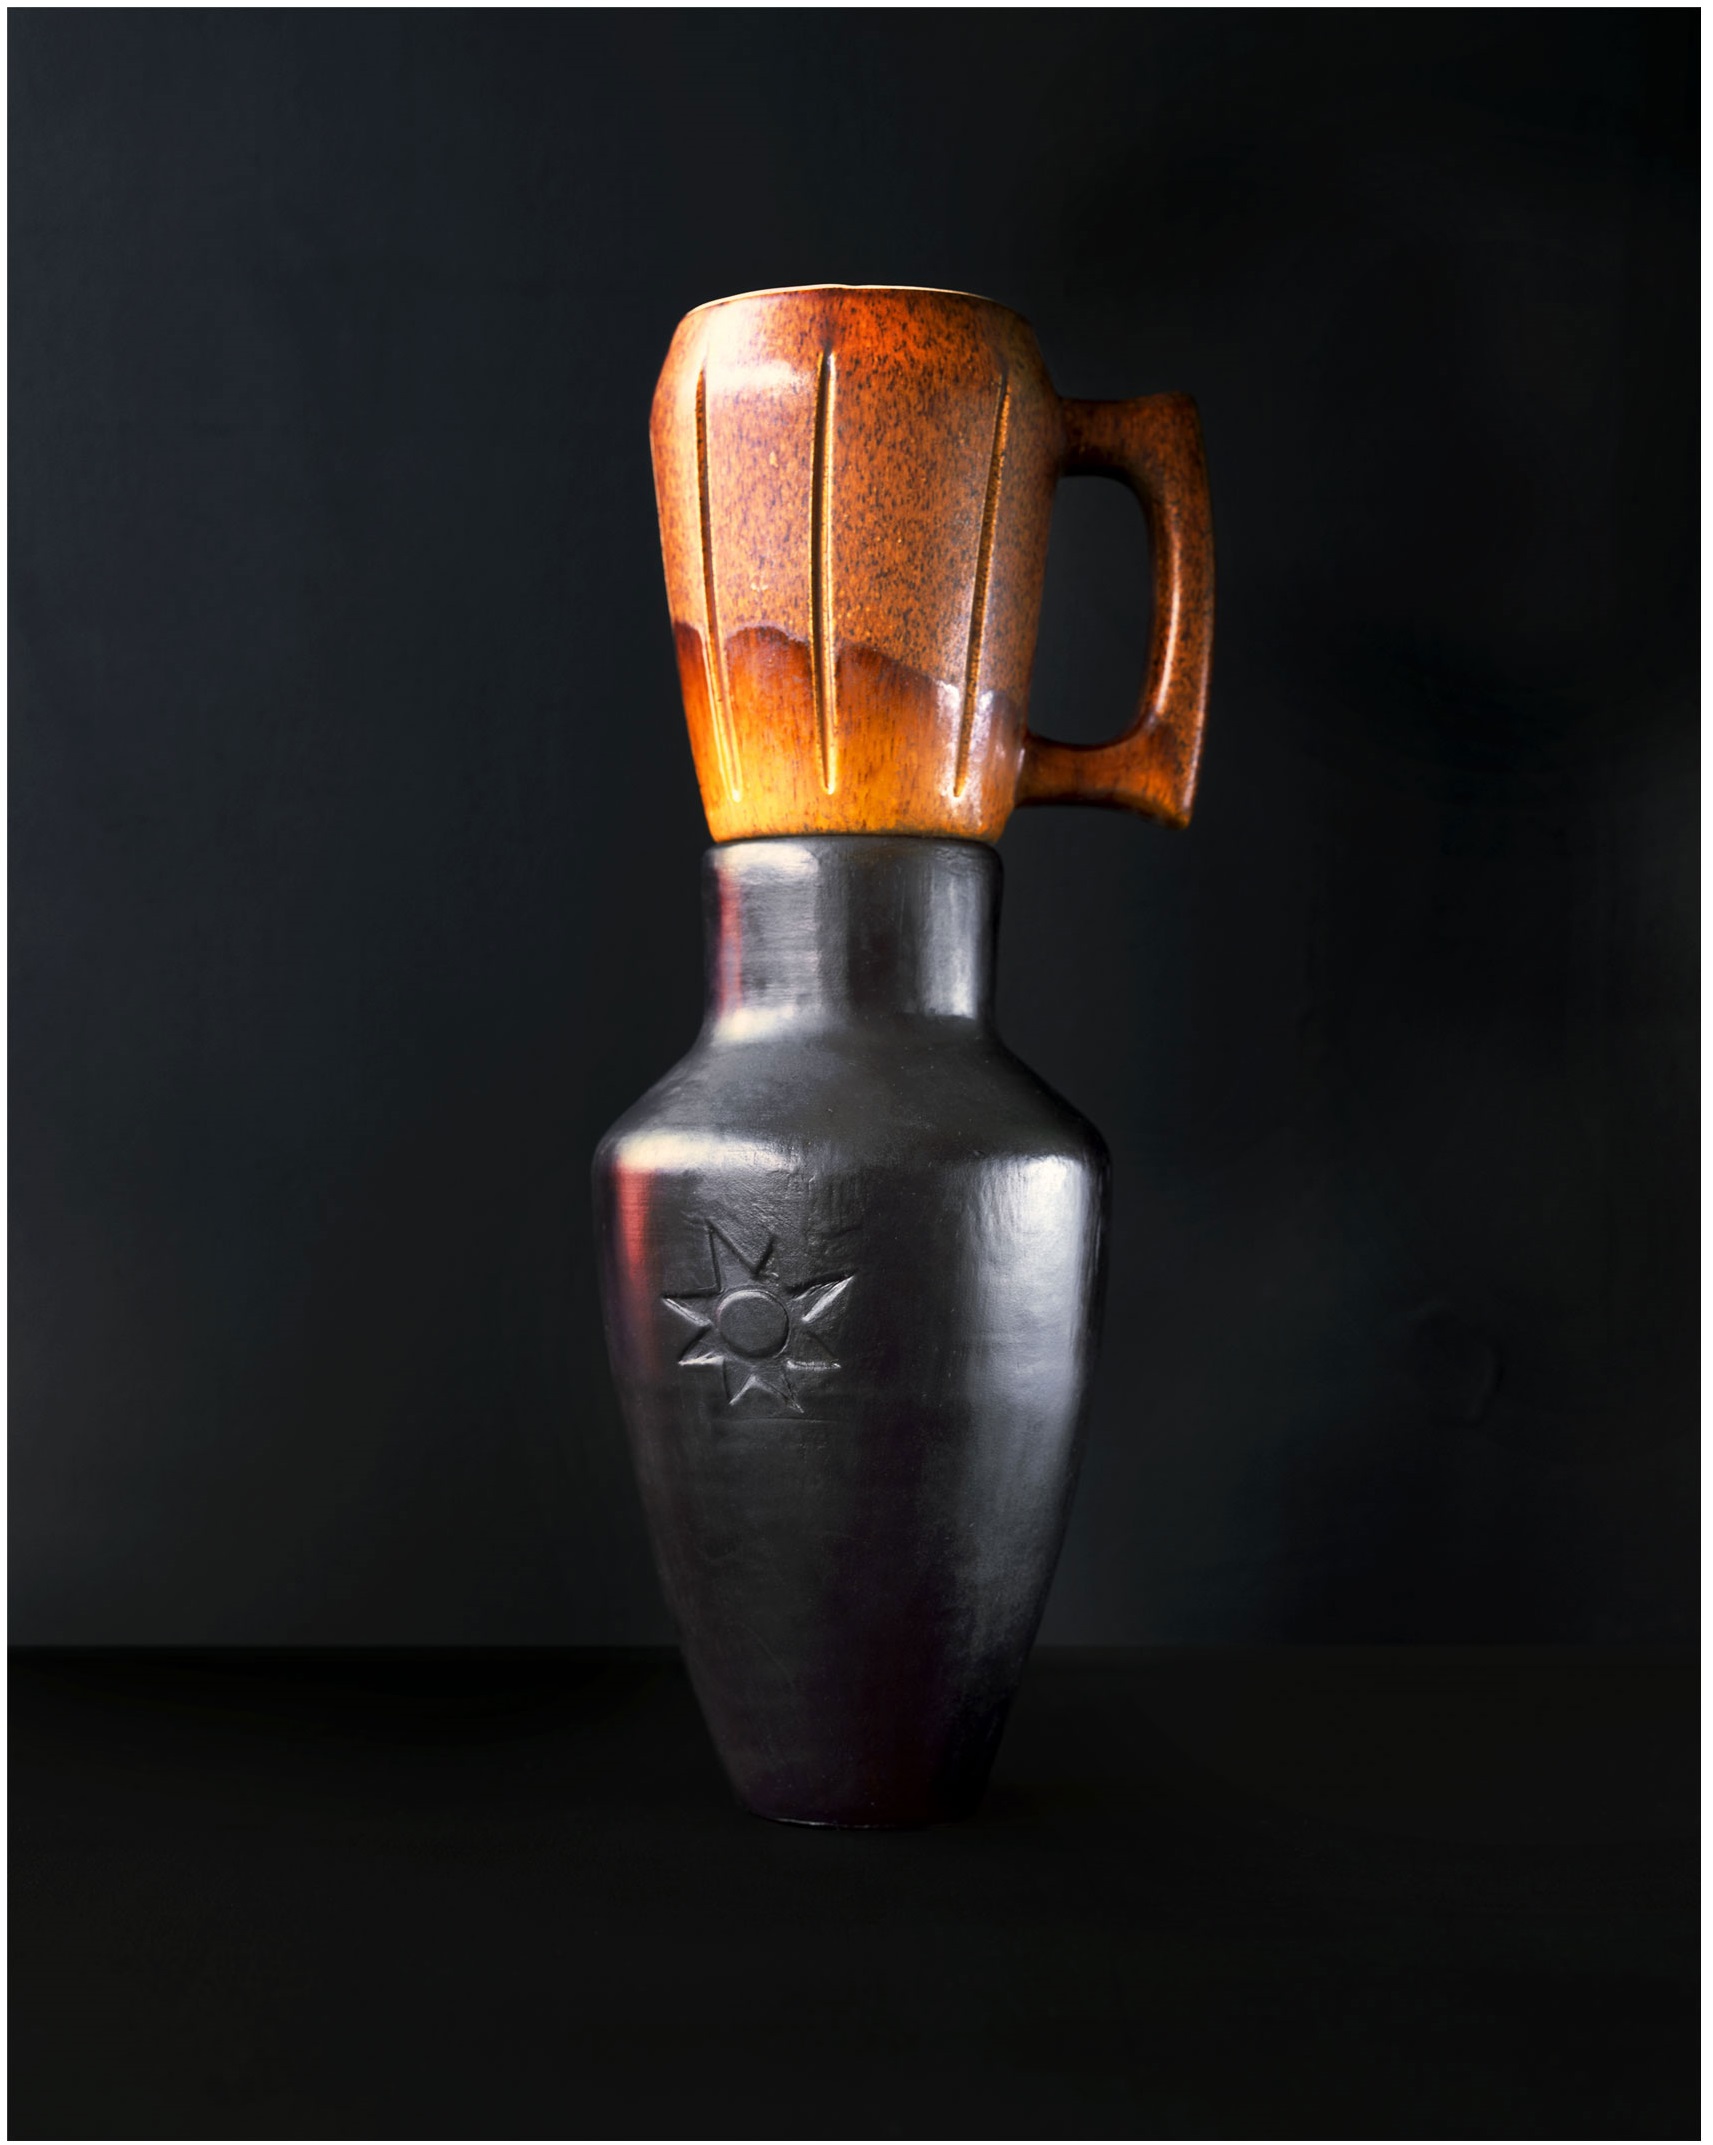 DAVID ADIKA, UNTITLED, (VASE, D.A.A.B.S A) FROM "BLACK MARKET", 2020 Color photography, inkjet print in varying dimensions 54 x 78 cm. (21.26 x 30.71 in.) Edition 1 of 3, with 2 APs